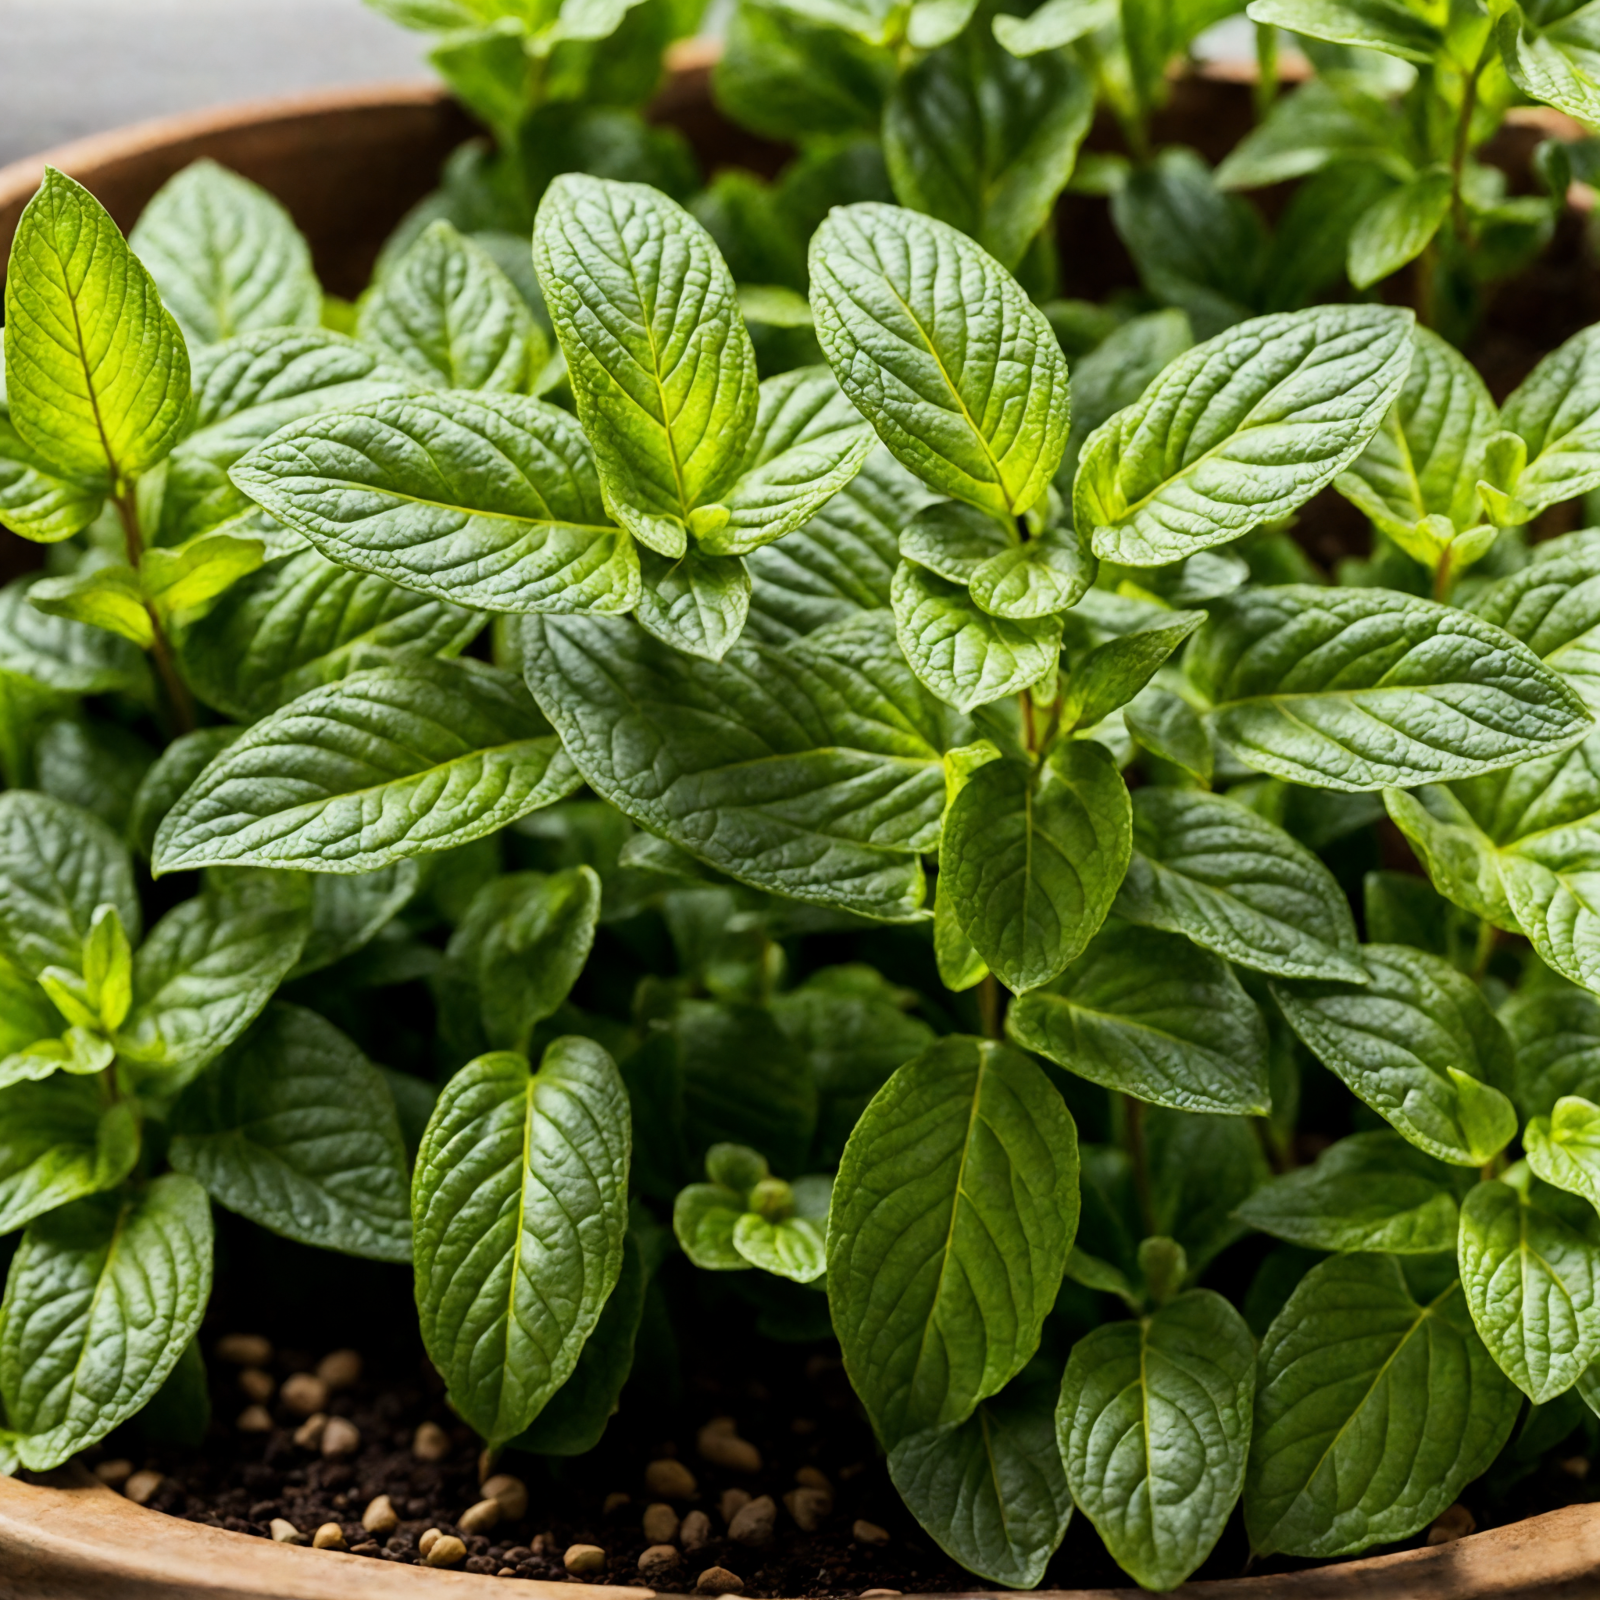 A realistic Mentha spicata (spearmint) in a bowl, with more plants in the background, clear lighting, dark backdrop.